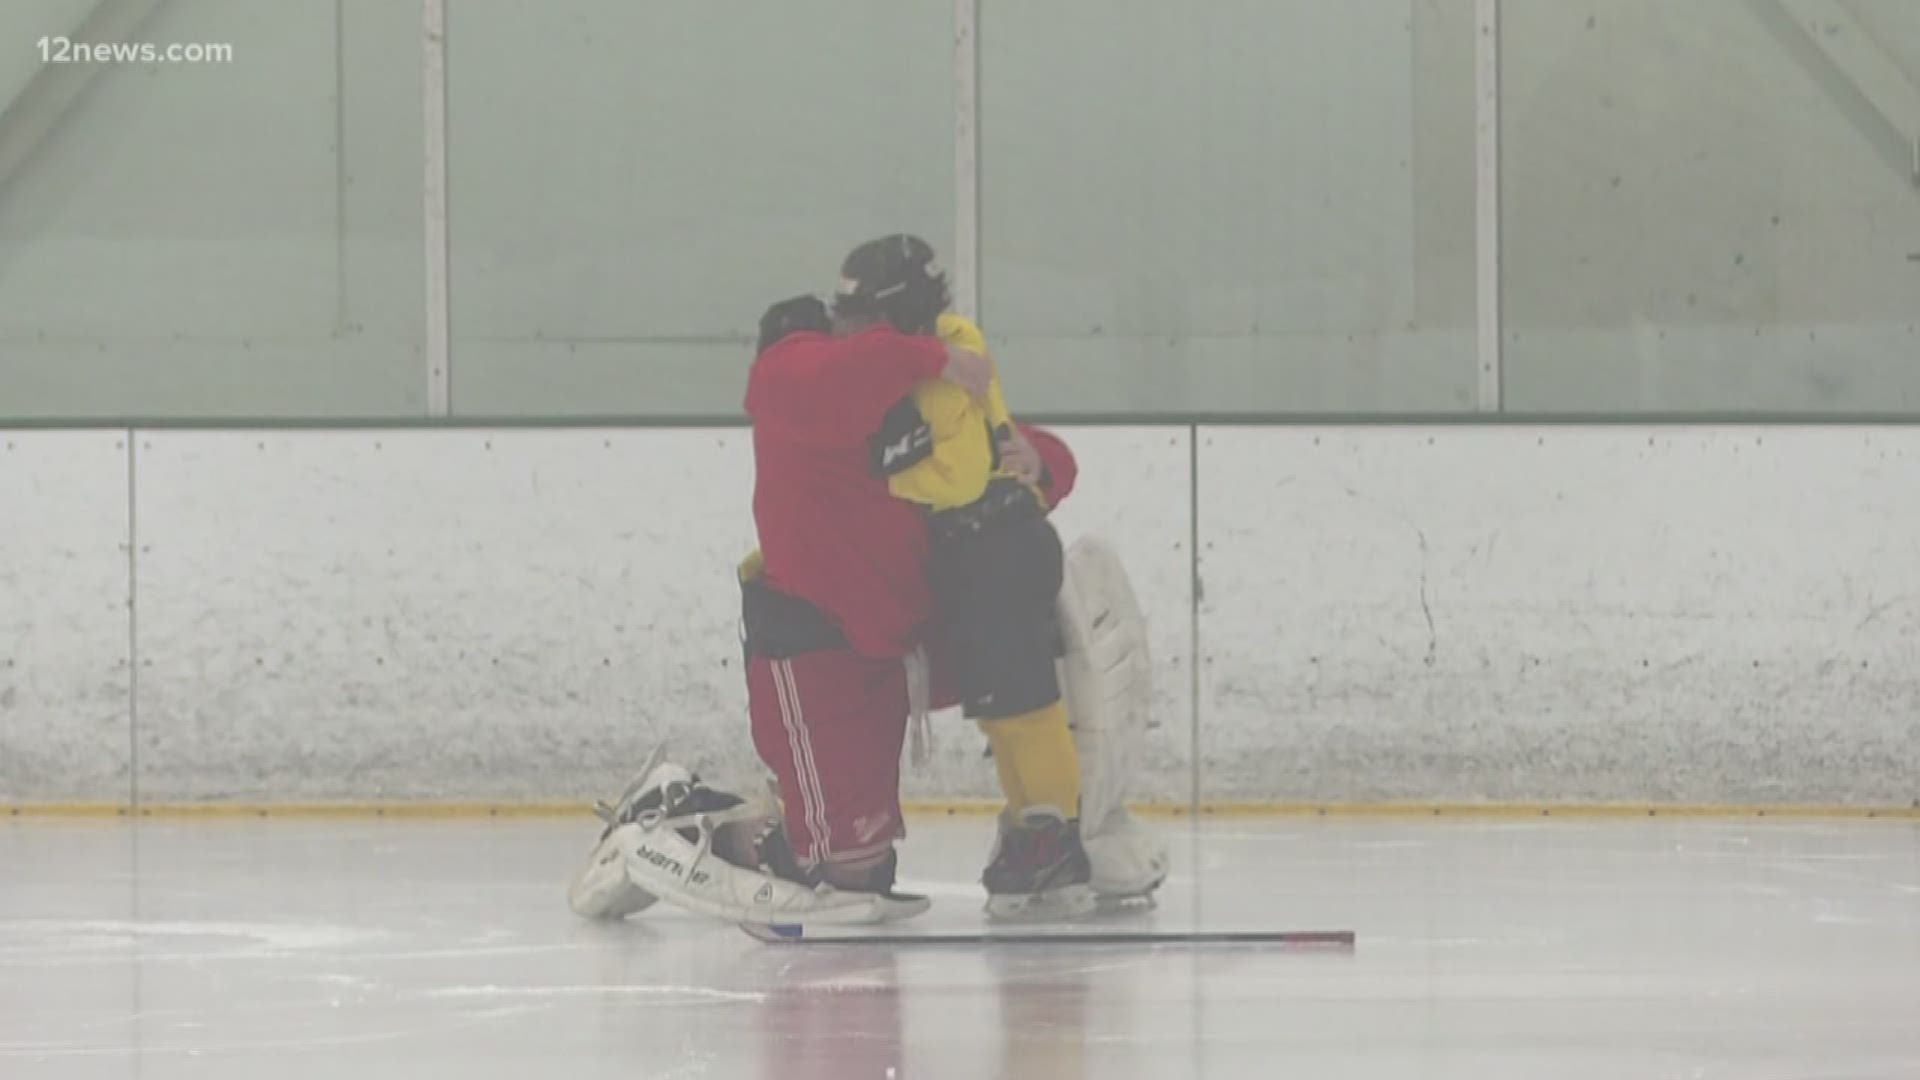 On Memorial Day we remember the men and women who made the ultimate sacrifice for our country, but we also remember the families that also make sacrifices, especially the children. One AZ National Guardsman had an emotional reunion with his son at hockey practice.